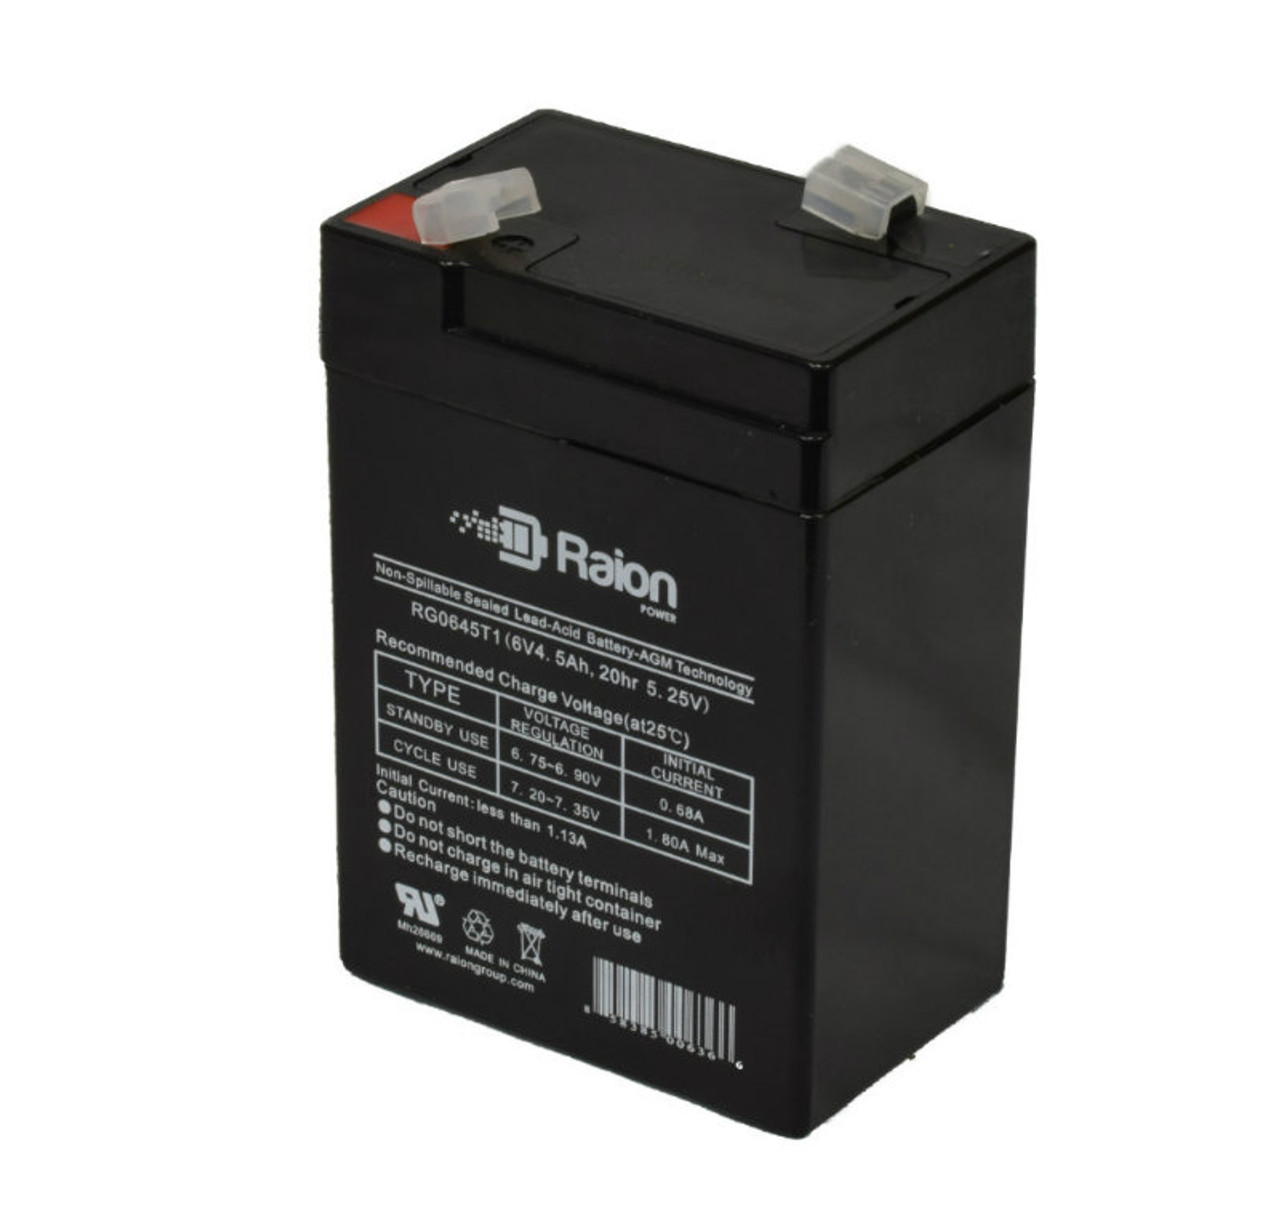 Raion Power RG0645T1 6V 4.5Ah Replacement Battery Cartridge for Light Alarms RSQGD